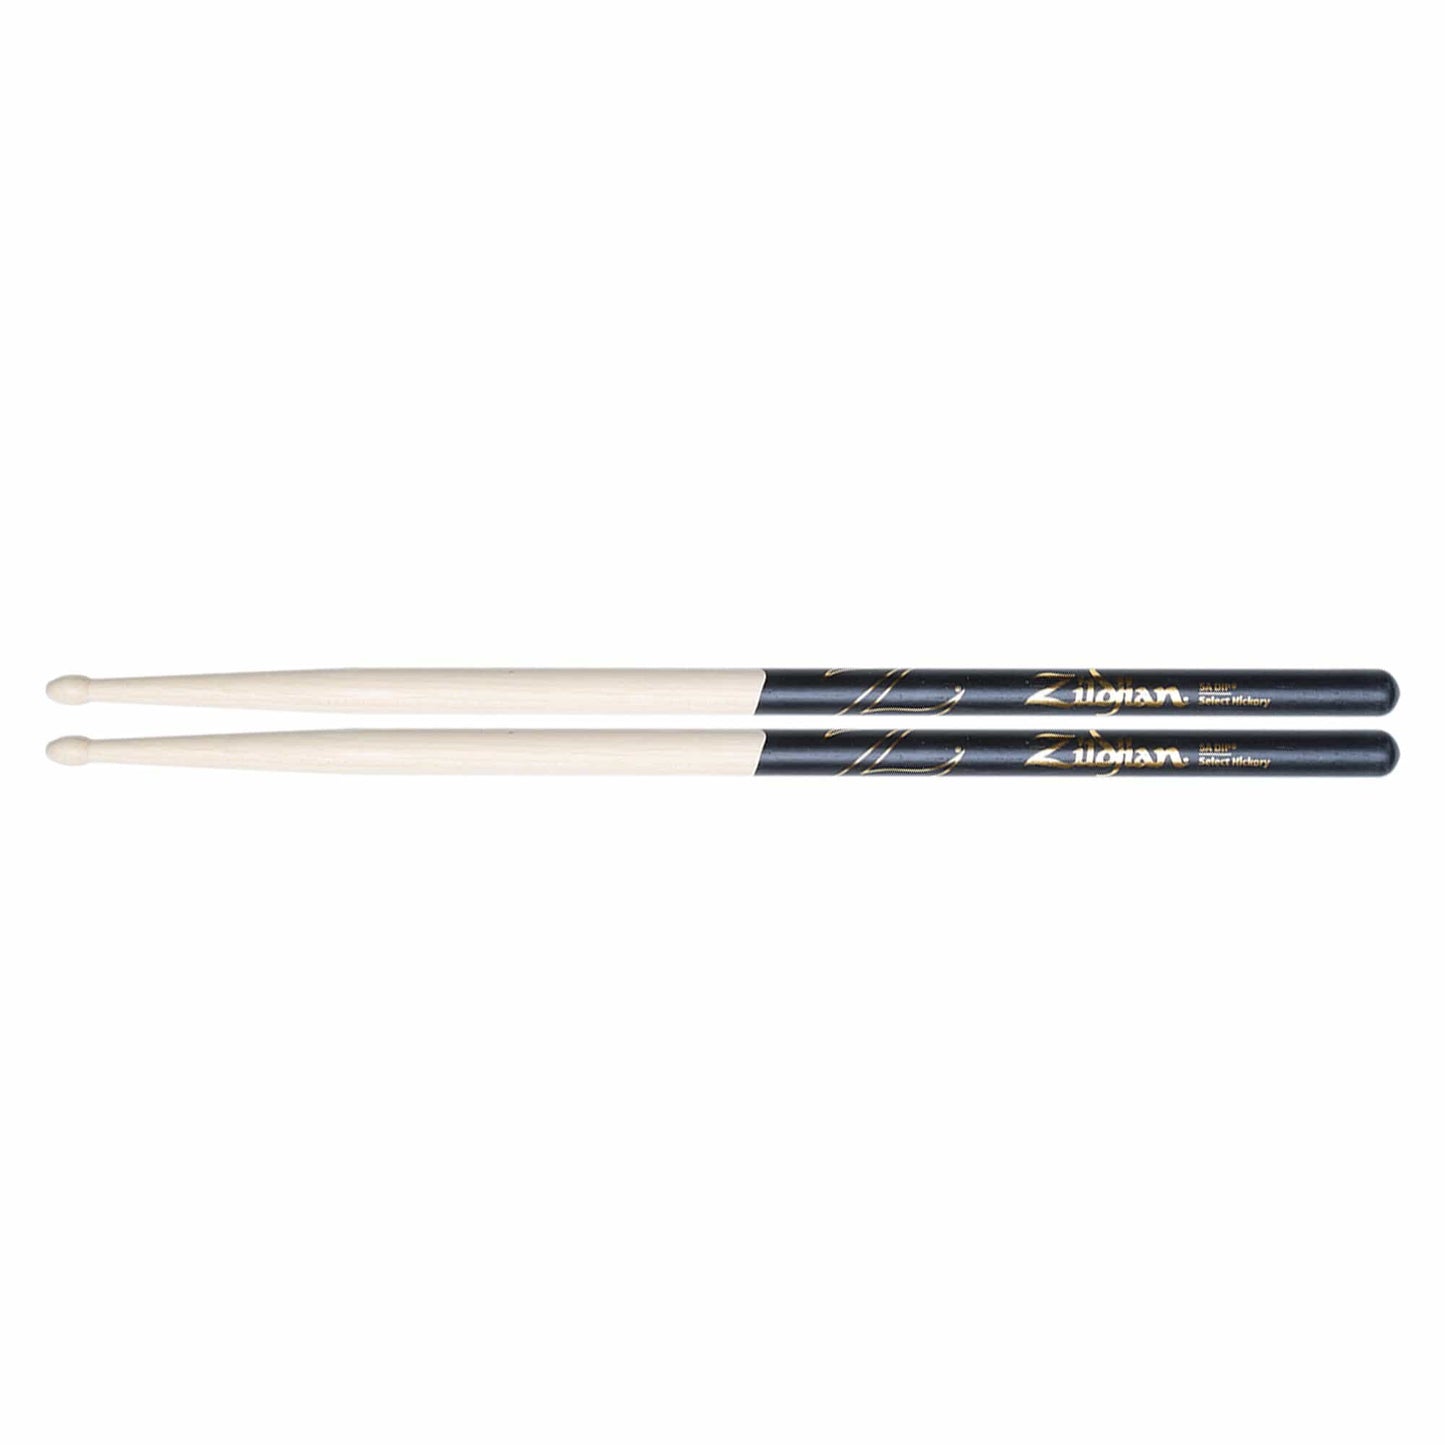 Zildjian 5A Dip Wood Tip Drum Sticks Drums and Percussion / Parts and Accessories / Drum Sticks and Mallets